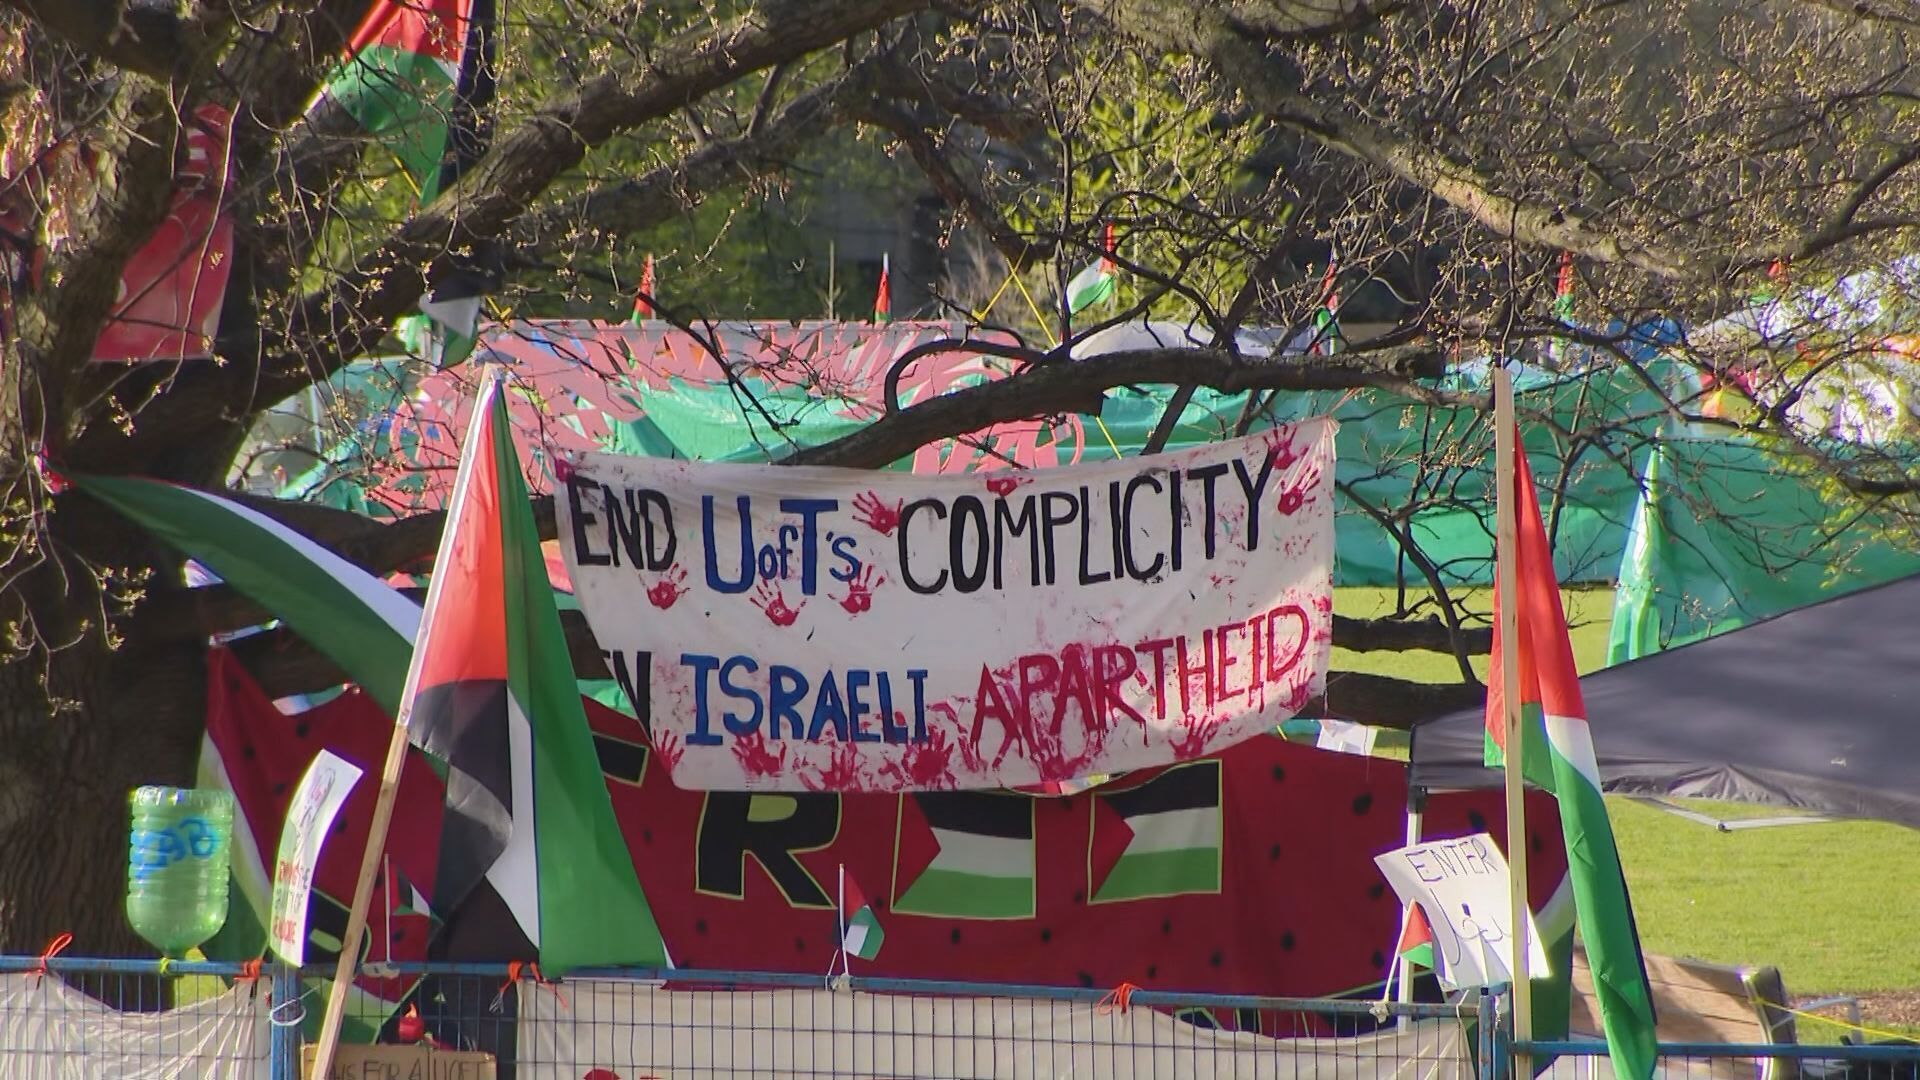 Protestors at UofT encampment vow not to move after meeting administration